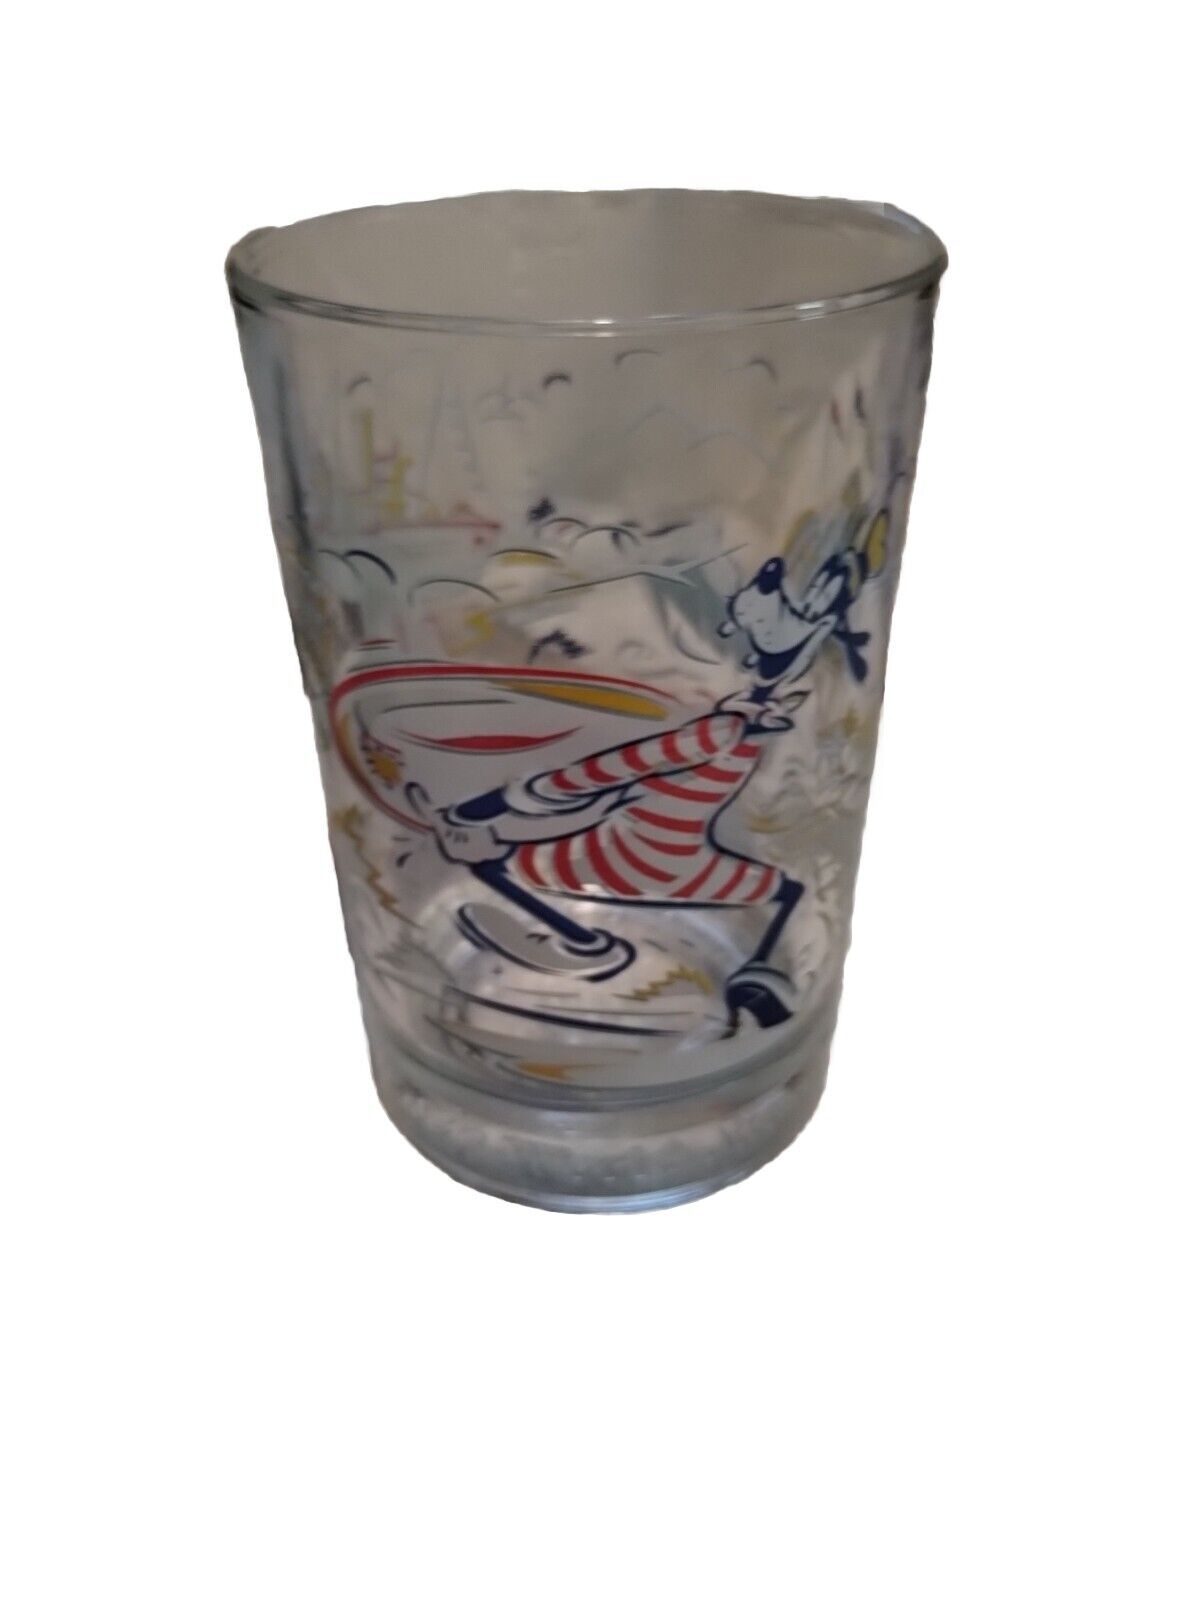 Disney Goofy Water Glass Vintage Collectible